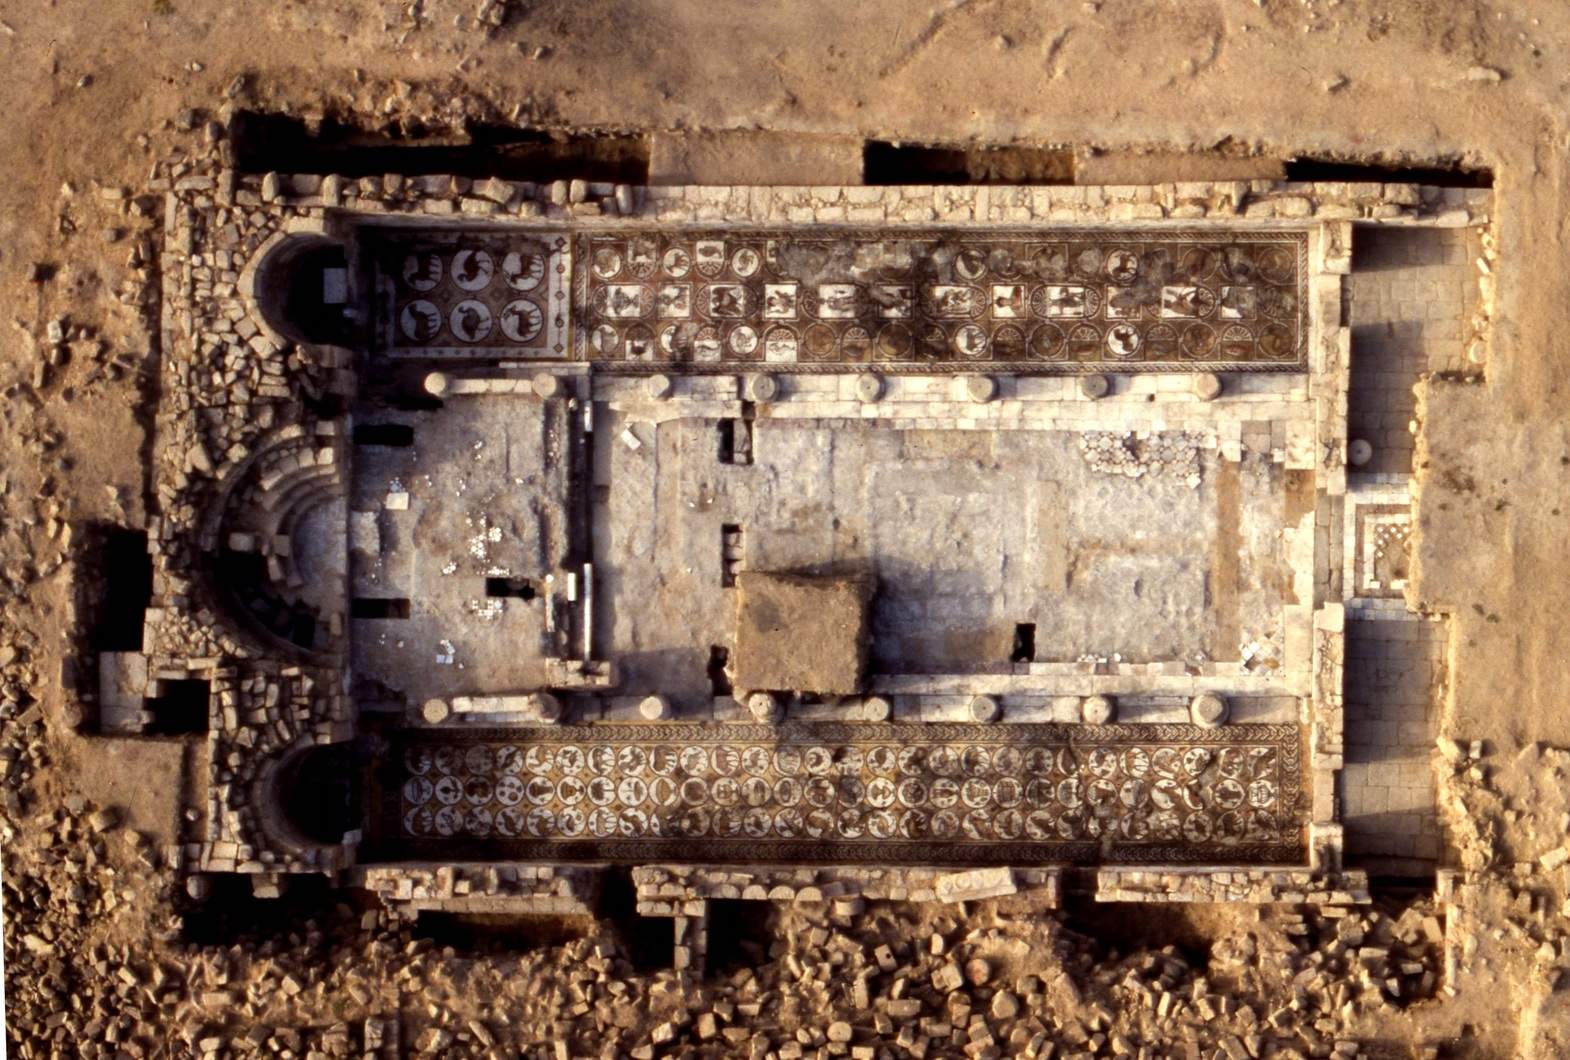 Aerial view of the Petra Church, excavated by ACOR in the early 1990s, where the famous Petra Papyri were discovered. Photo from ACOR archive.